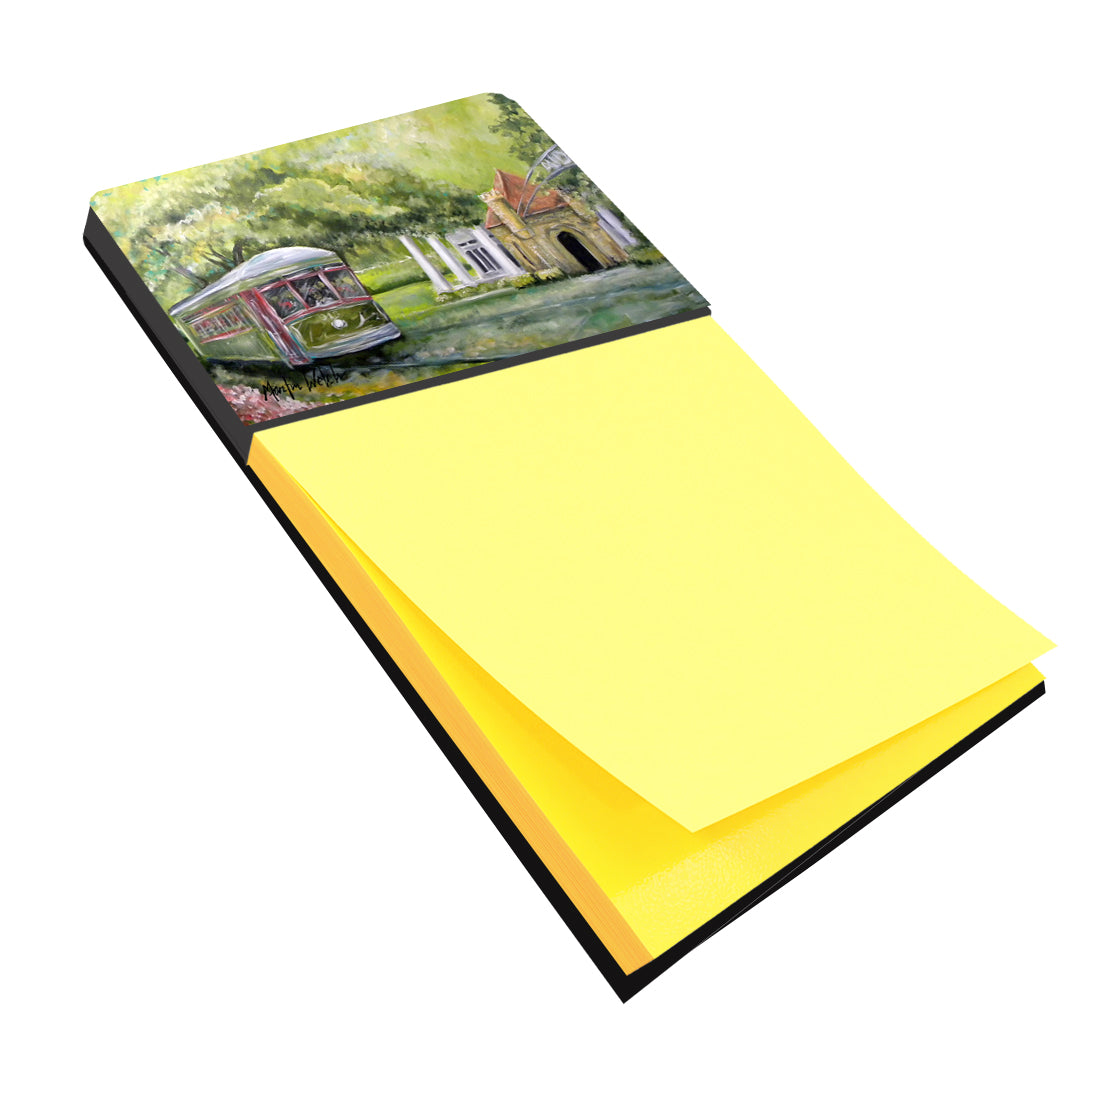 Buy this Next Stop Audobon Park Streetcar Sticky Note Holder